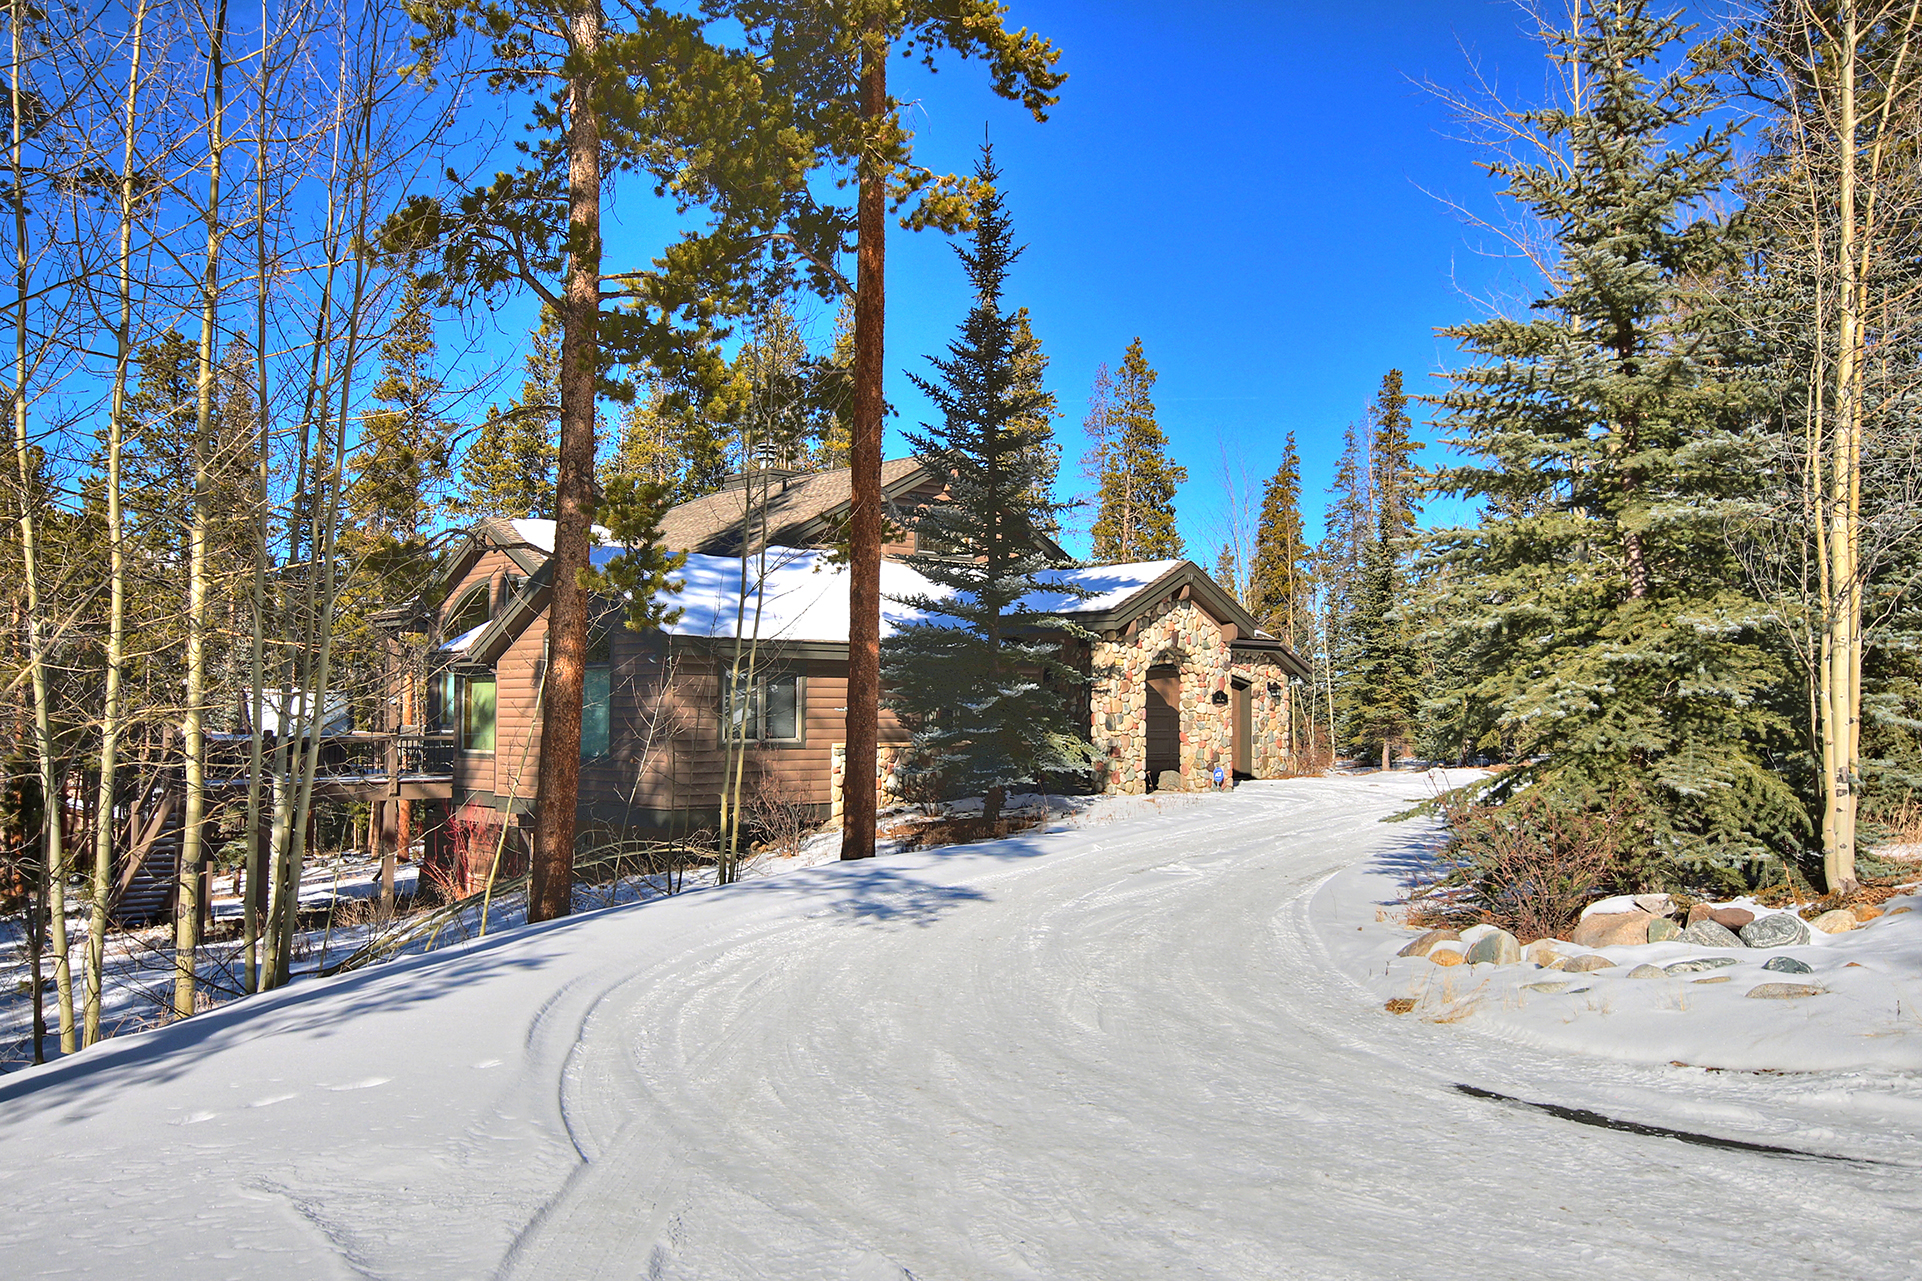 Enjoy your vacation with friends and family at this peaceful and secluded home - Evergreen Lodge Breckenridge Vacation Rental